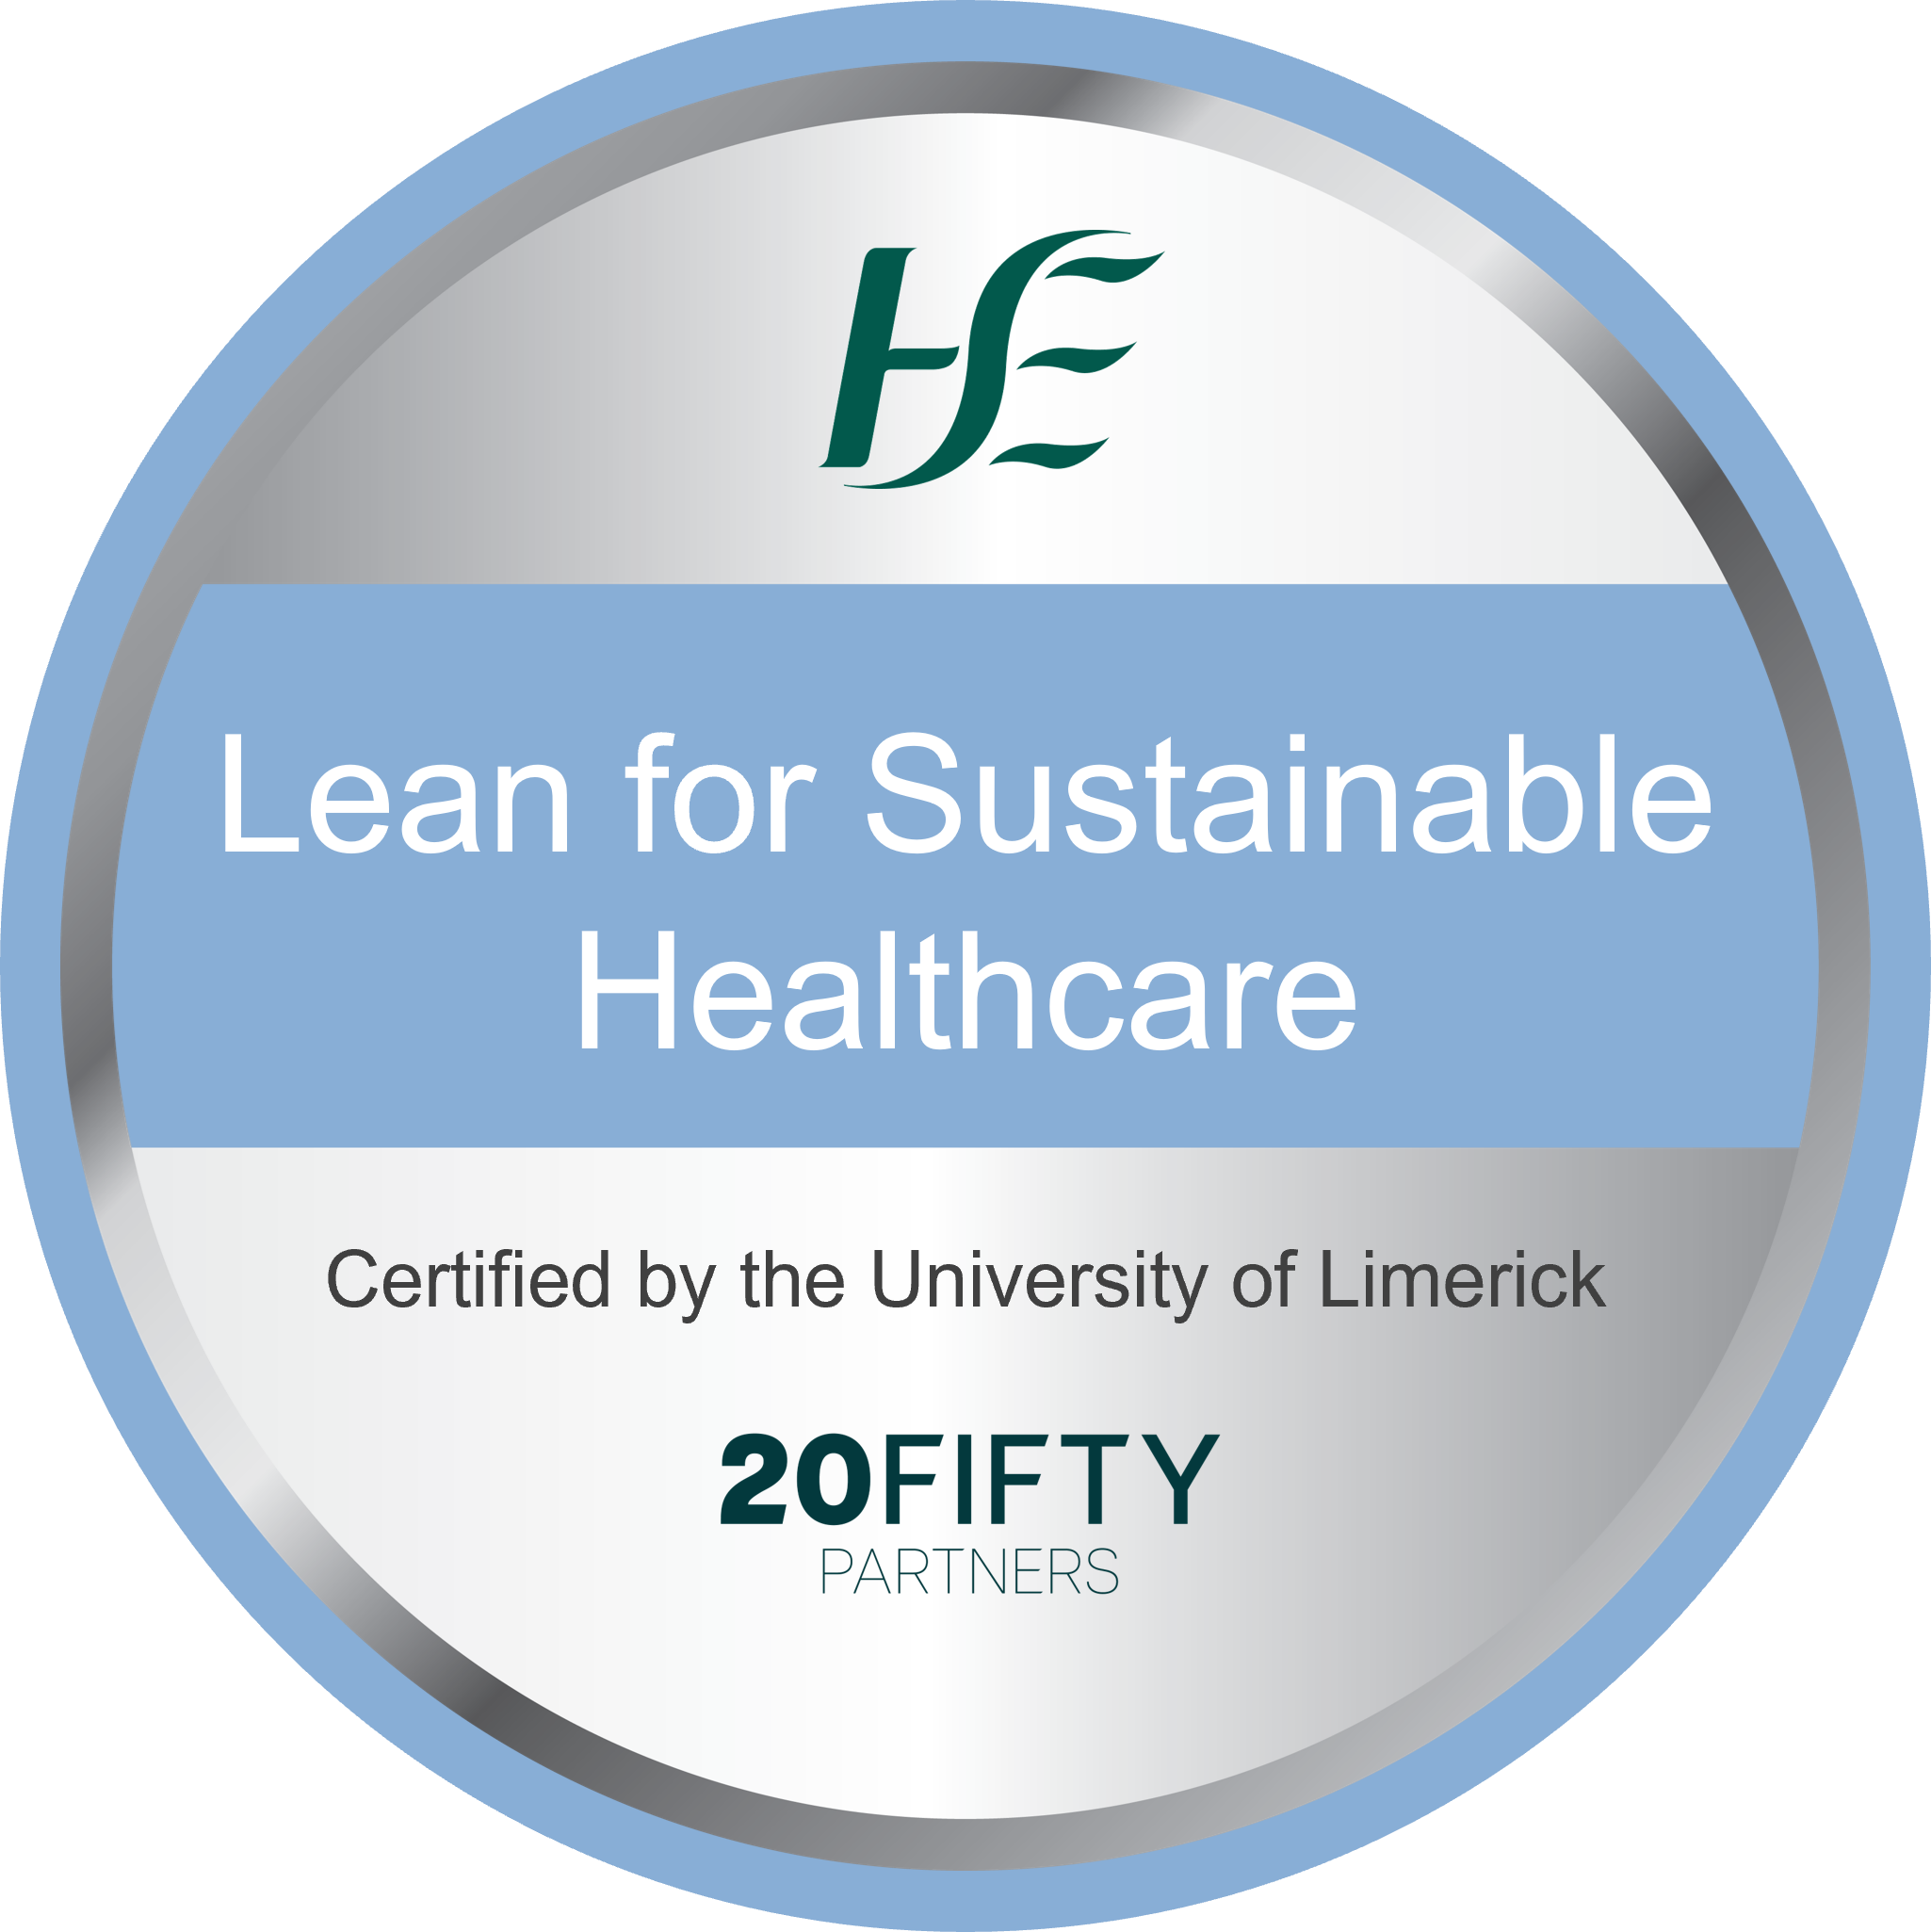 Lean for Sustainable Healthcare programme badge